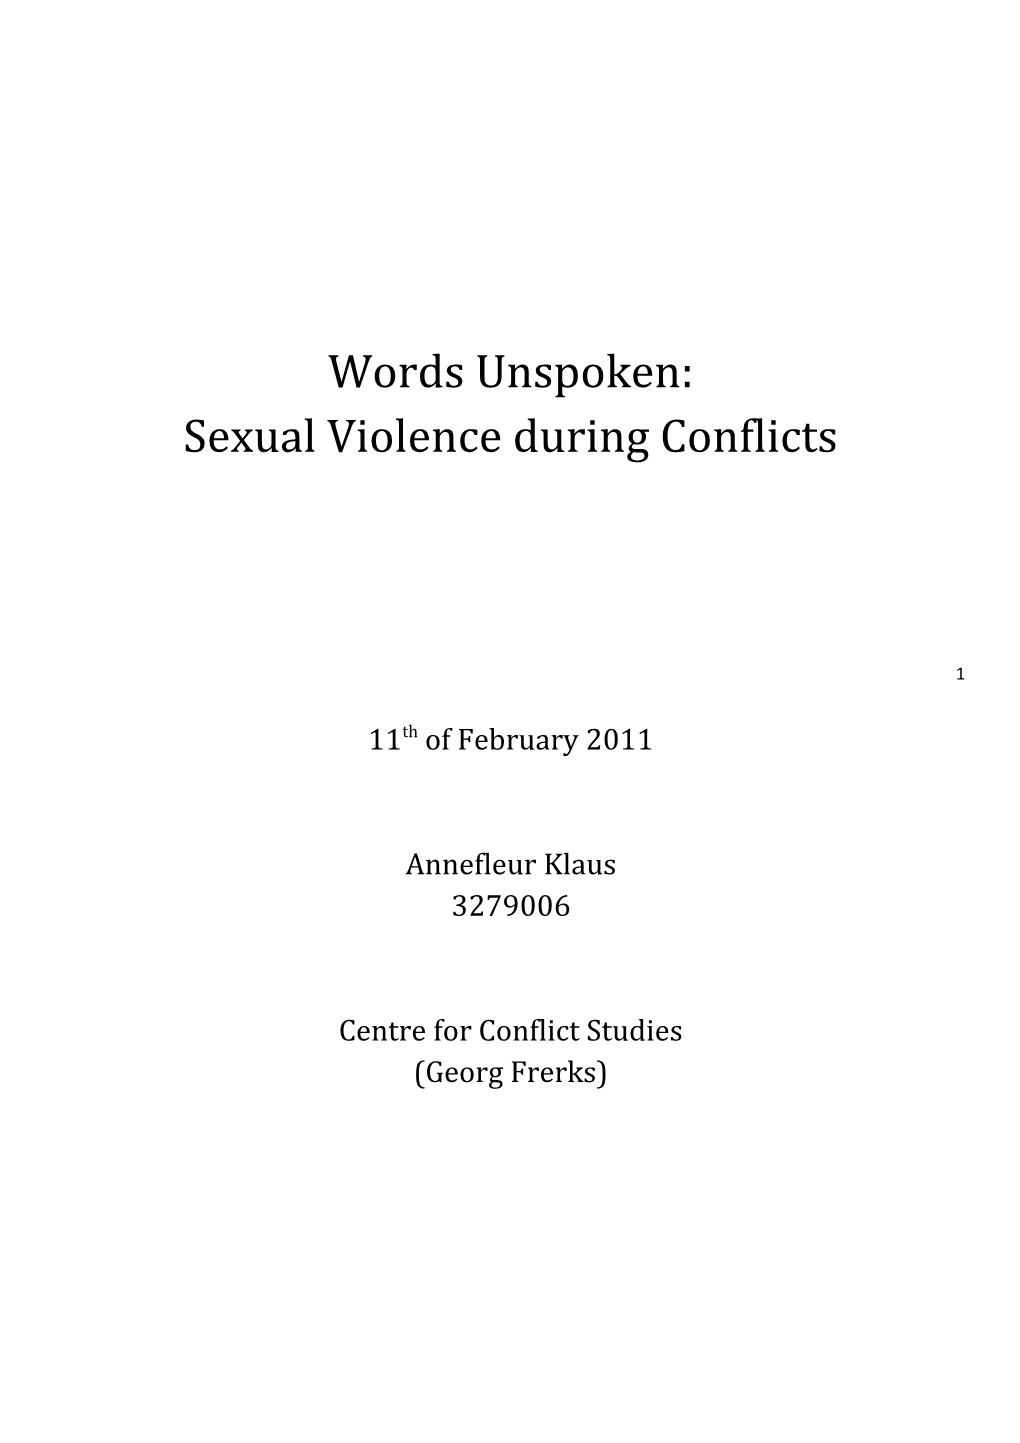 Sexual Violence During Conflicts